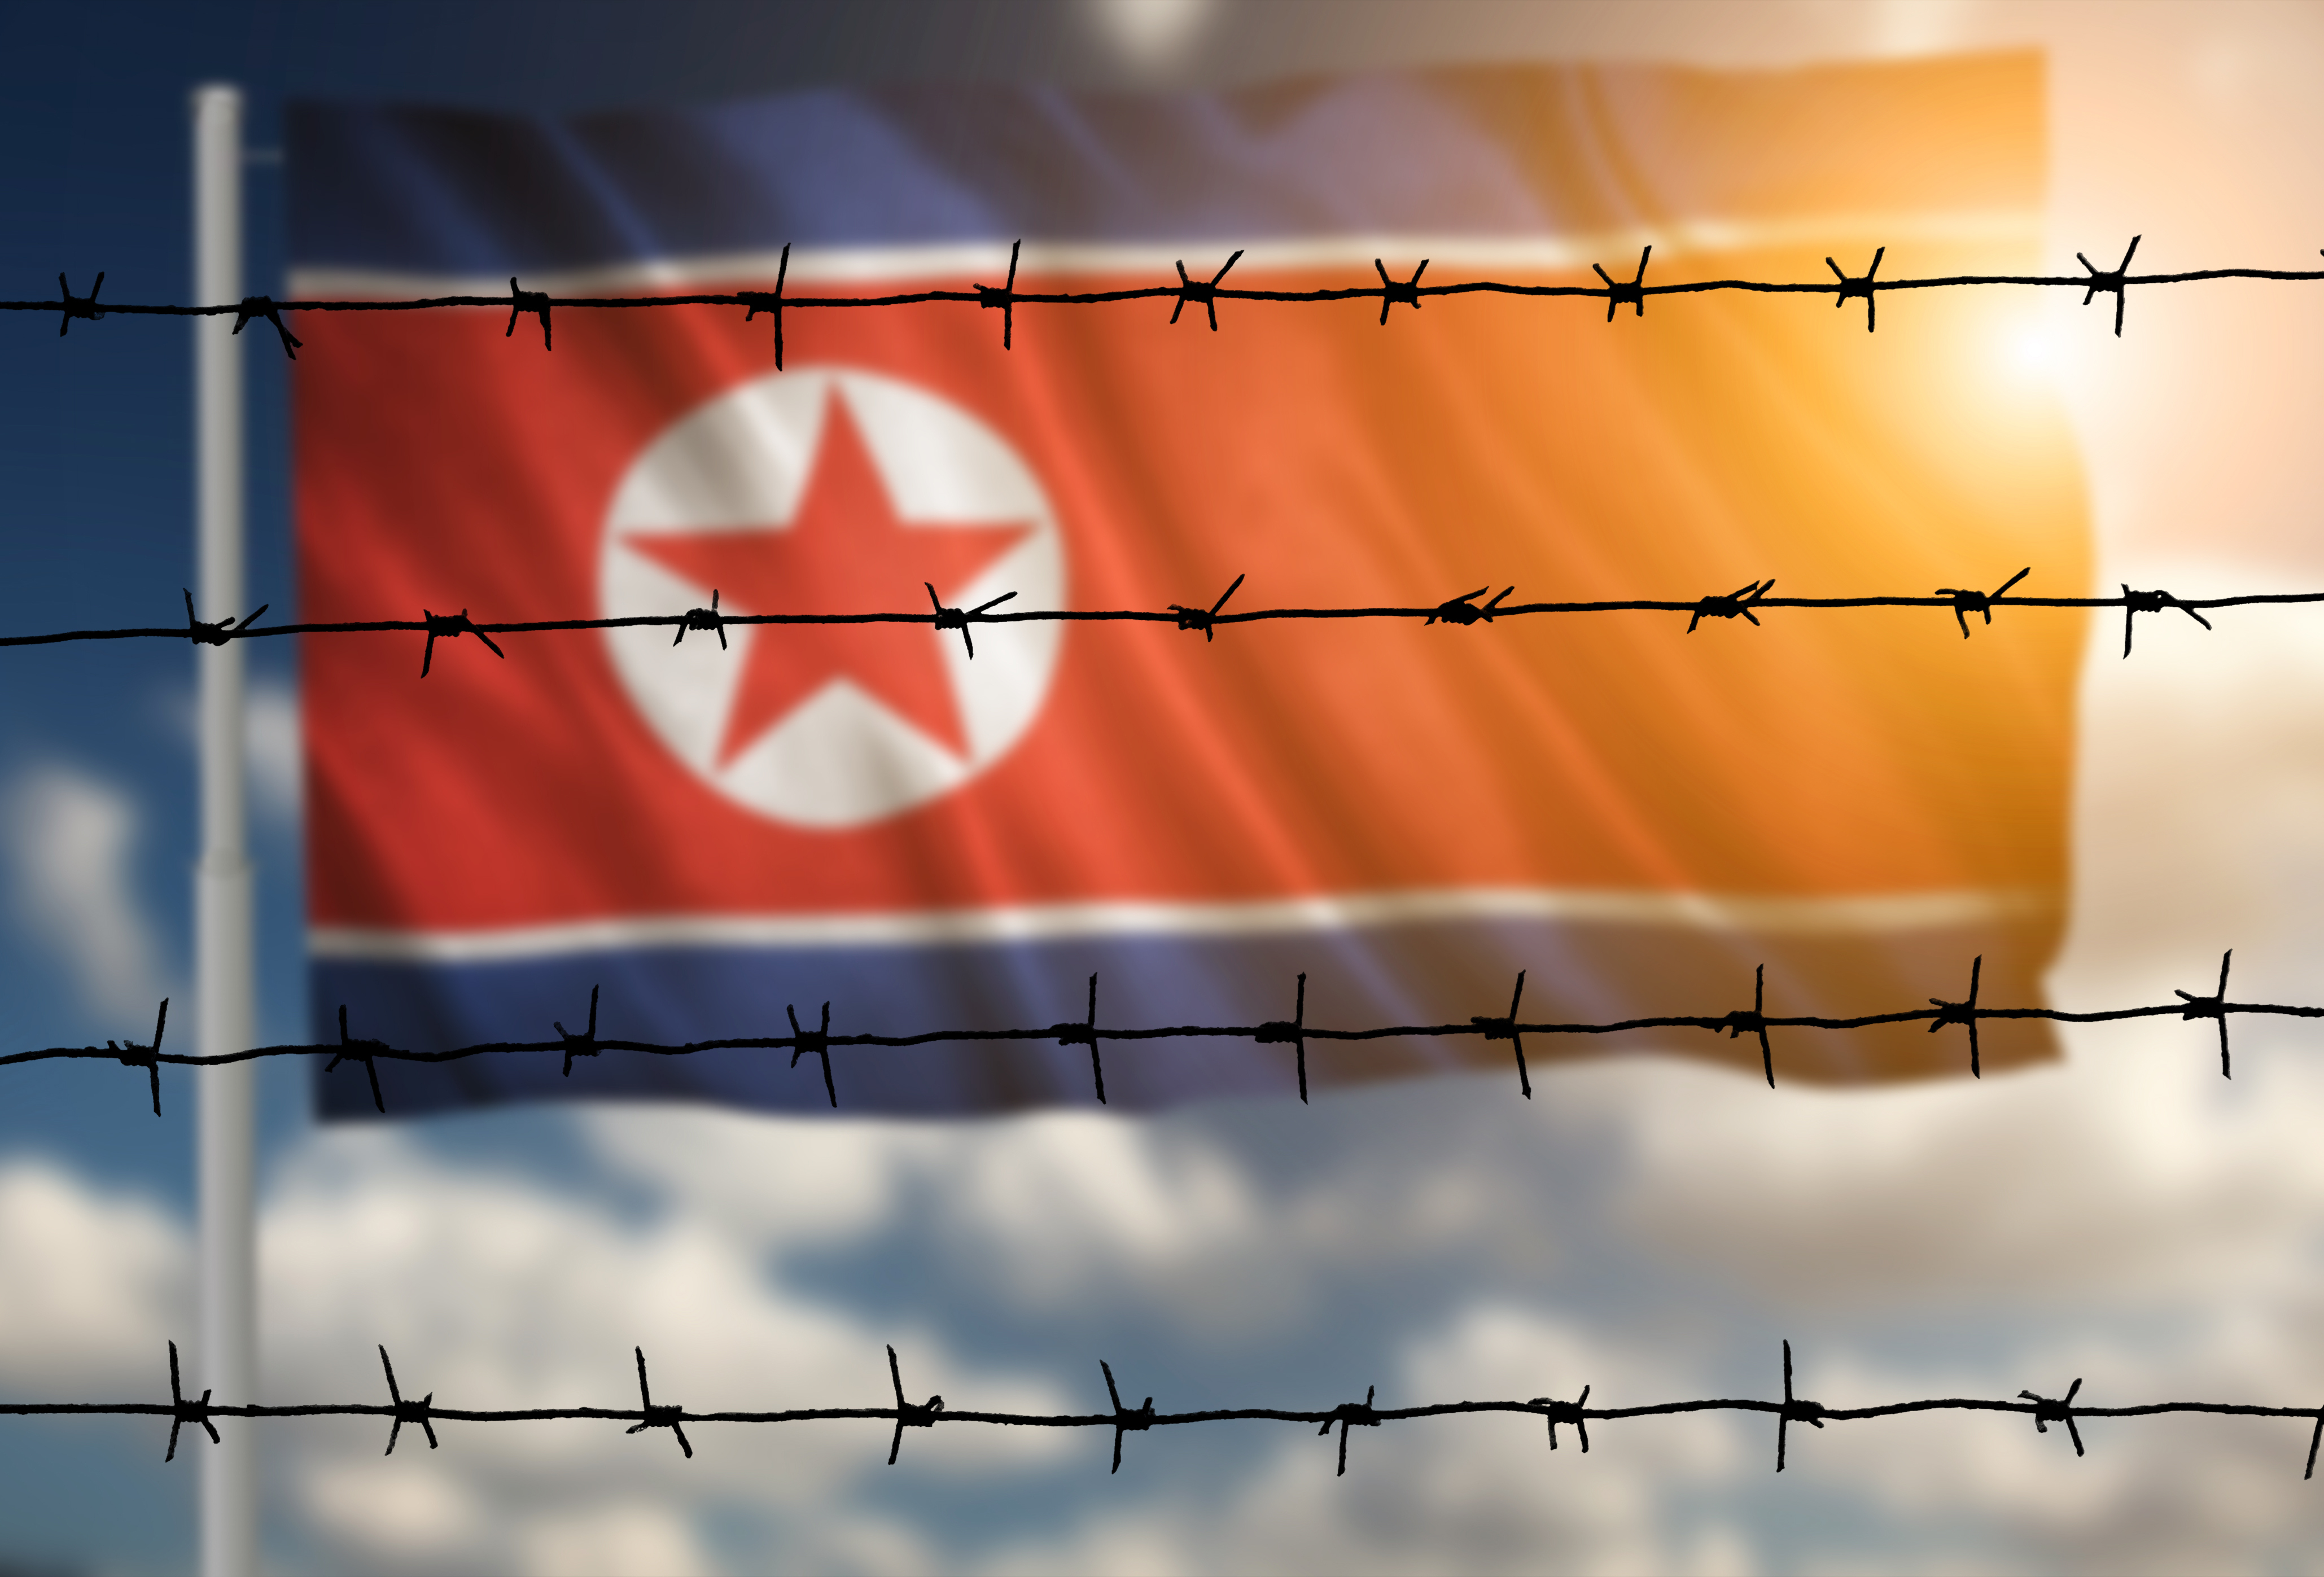 Ep. 27 Robert King: DPRK Human Rights Situation Since the COVID Pandemic